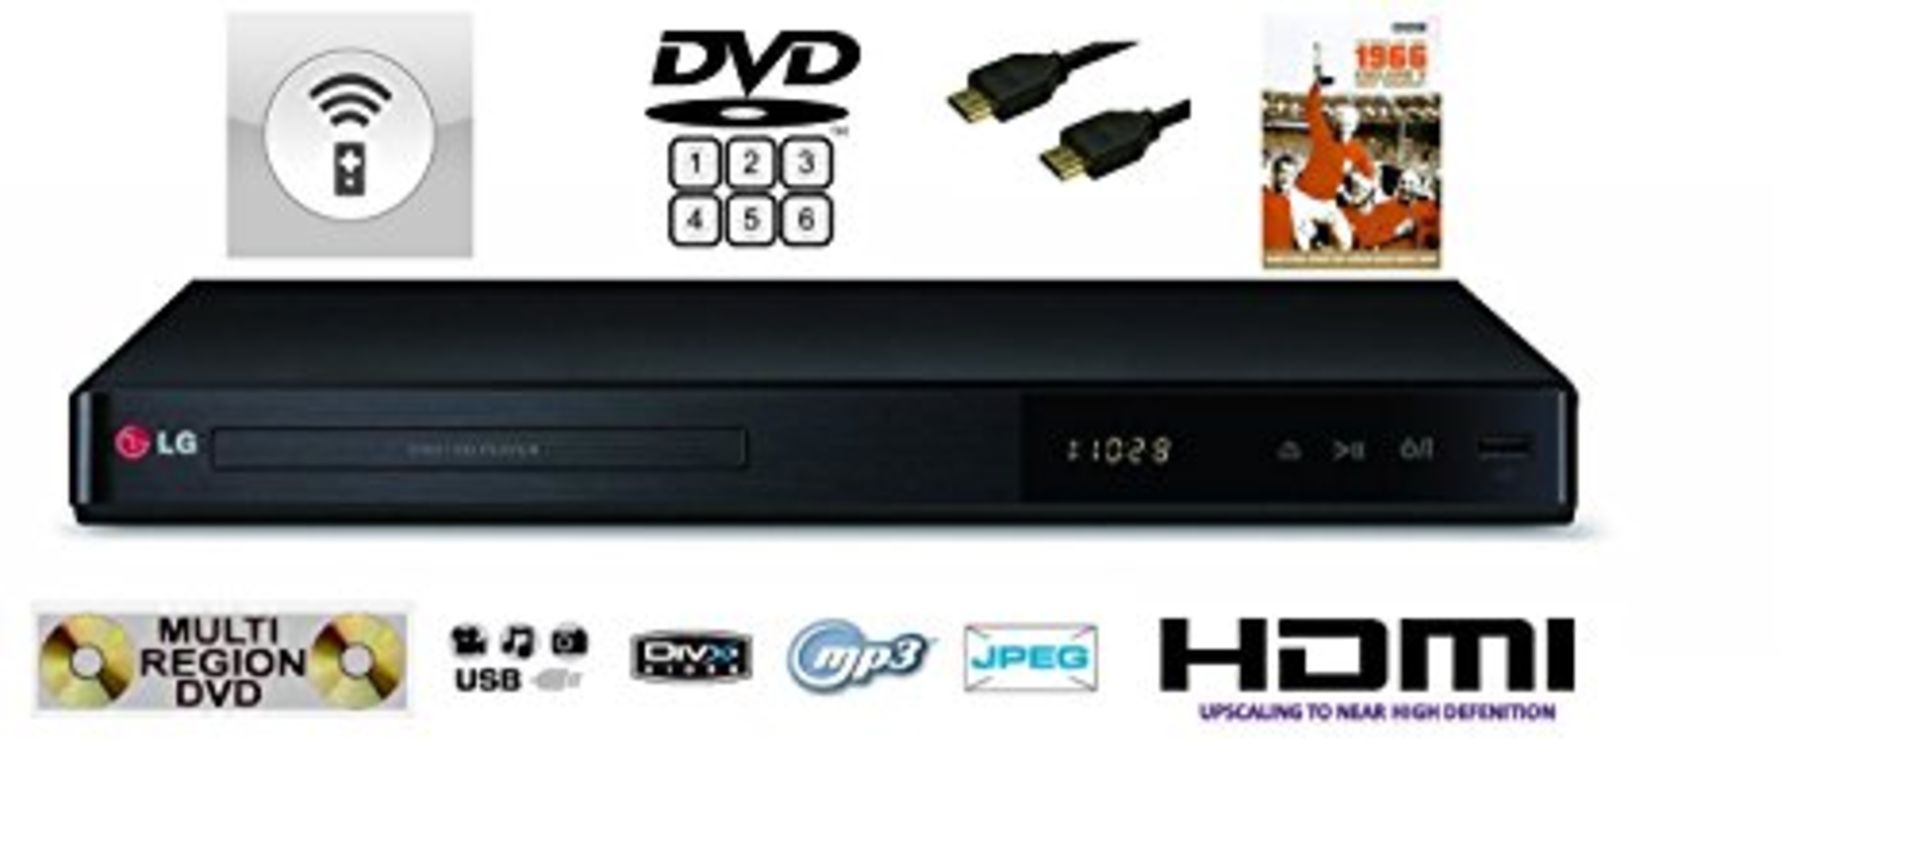 V Grade A LG DP542H DVD Player With Full HD 1080p Upscaling HDMI & USB X 2 YOUR BID PRICE TO BE